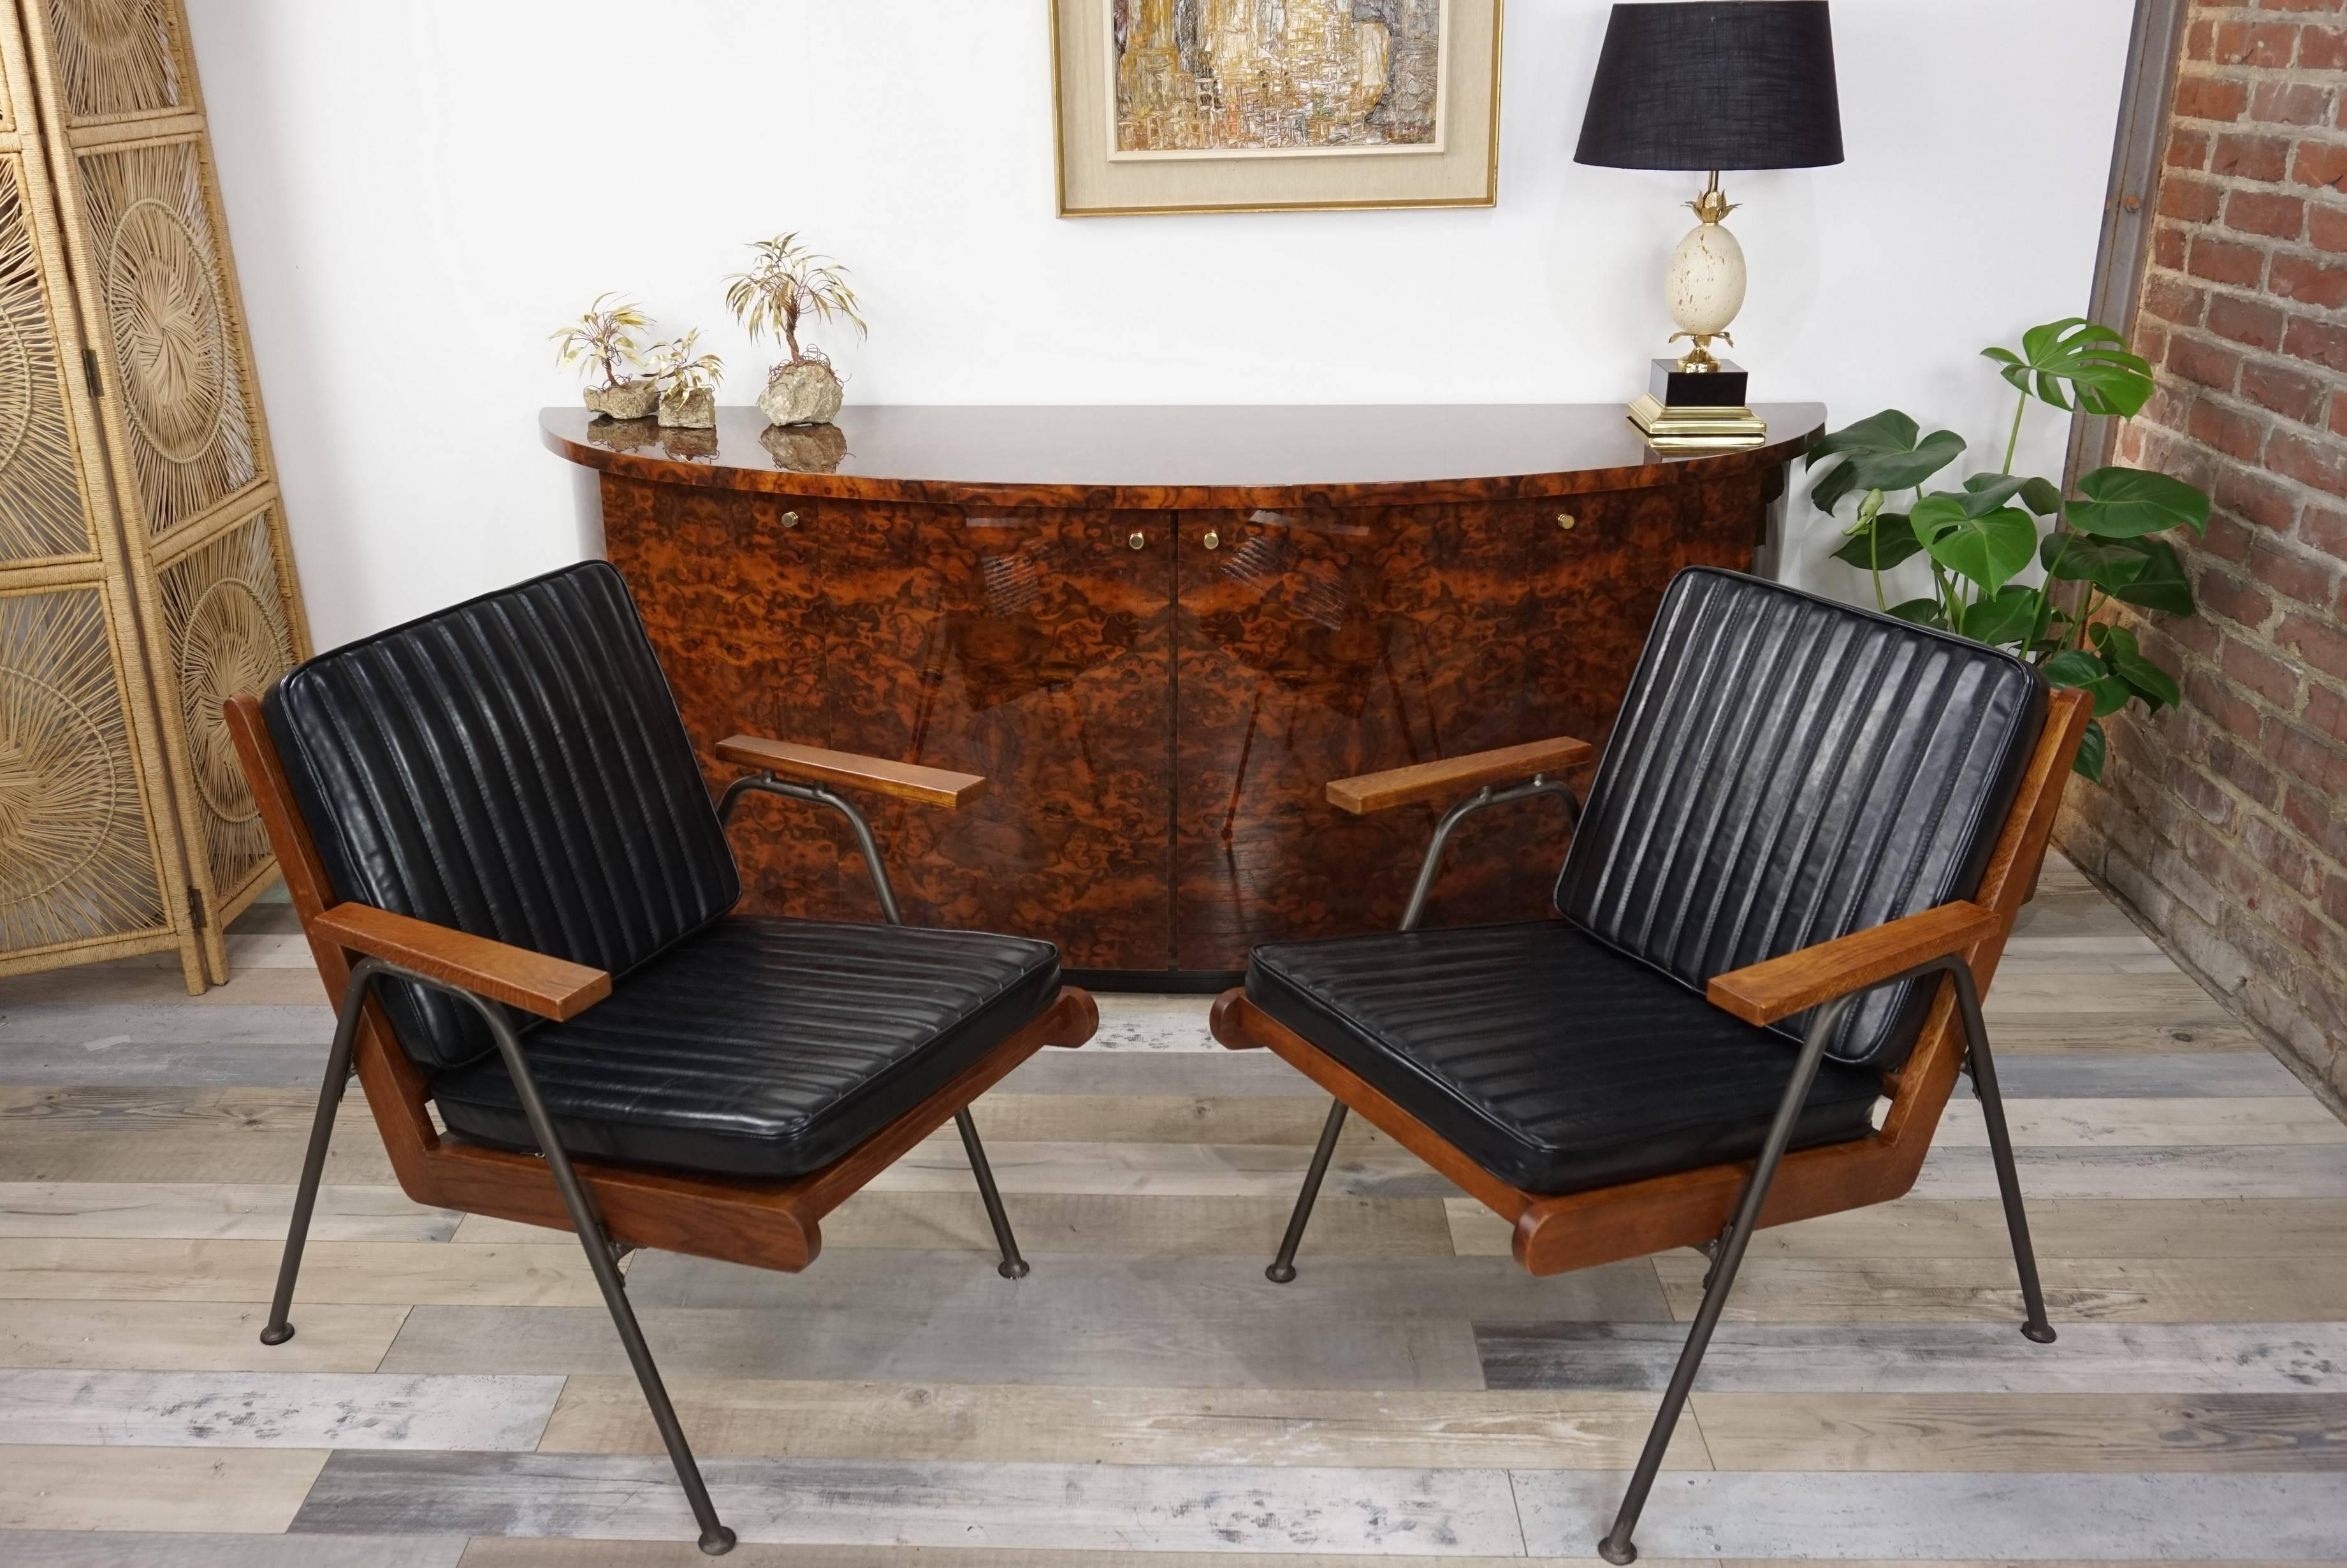 Scandinavian look and industrial style for those comfy armchairs: wooden shell, metal structure and black faux-leather cushions (H seat 45cm / H armrests 59cm; new items, never used).